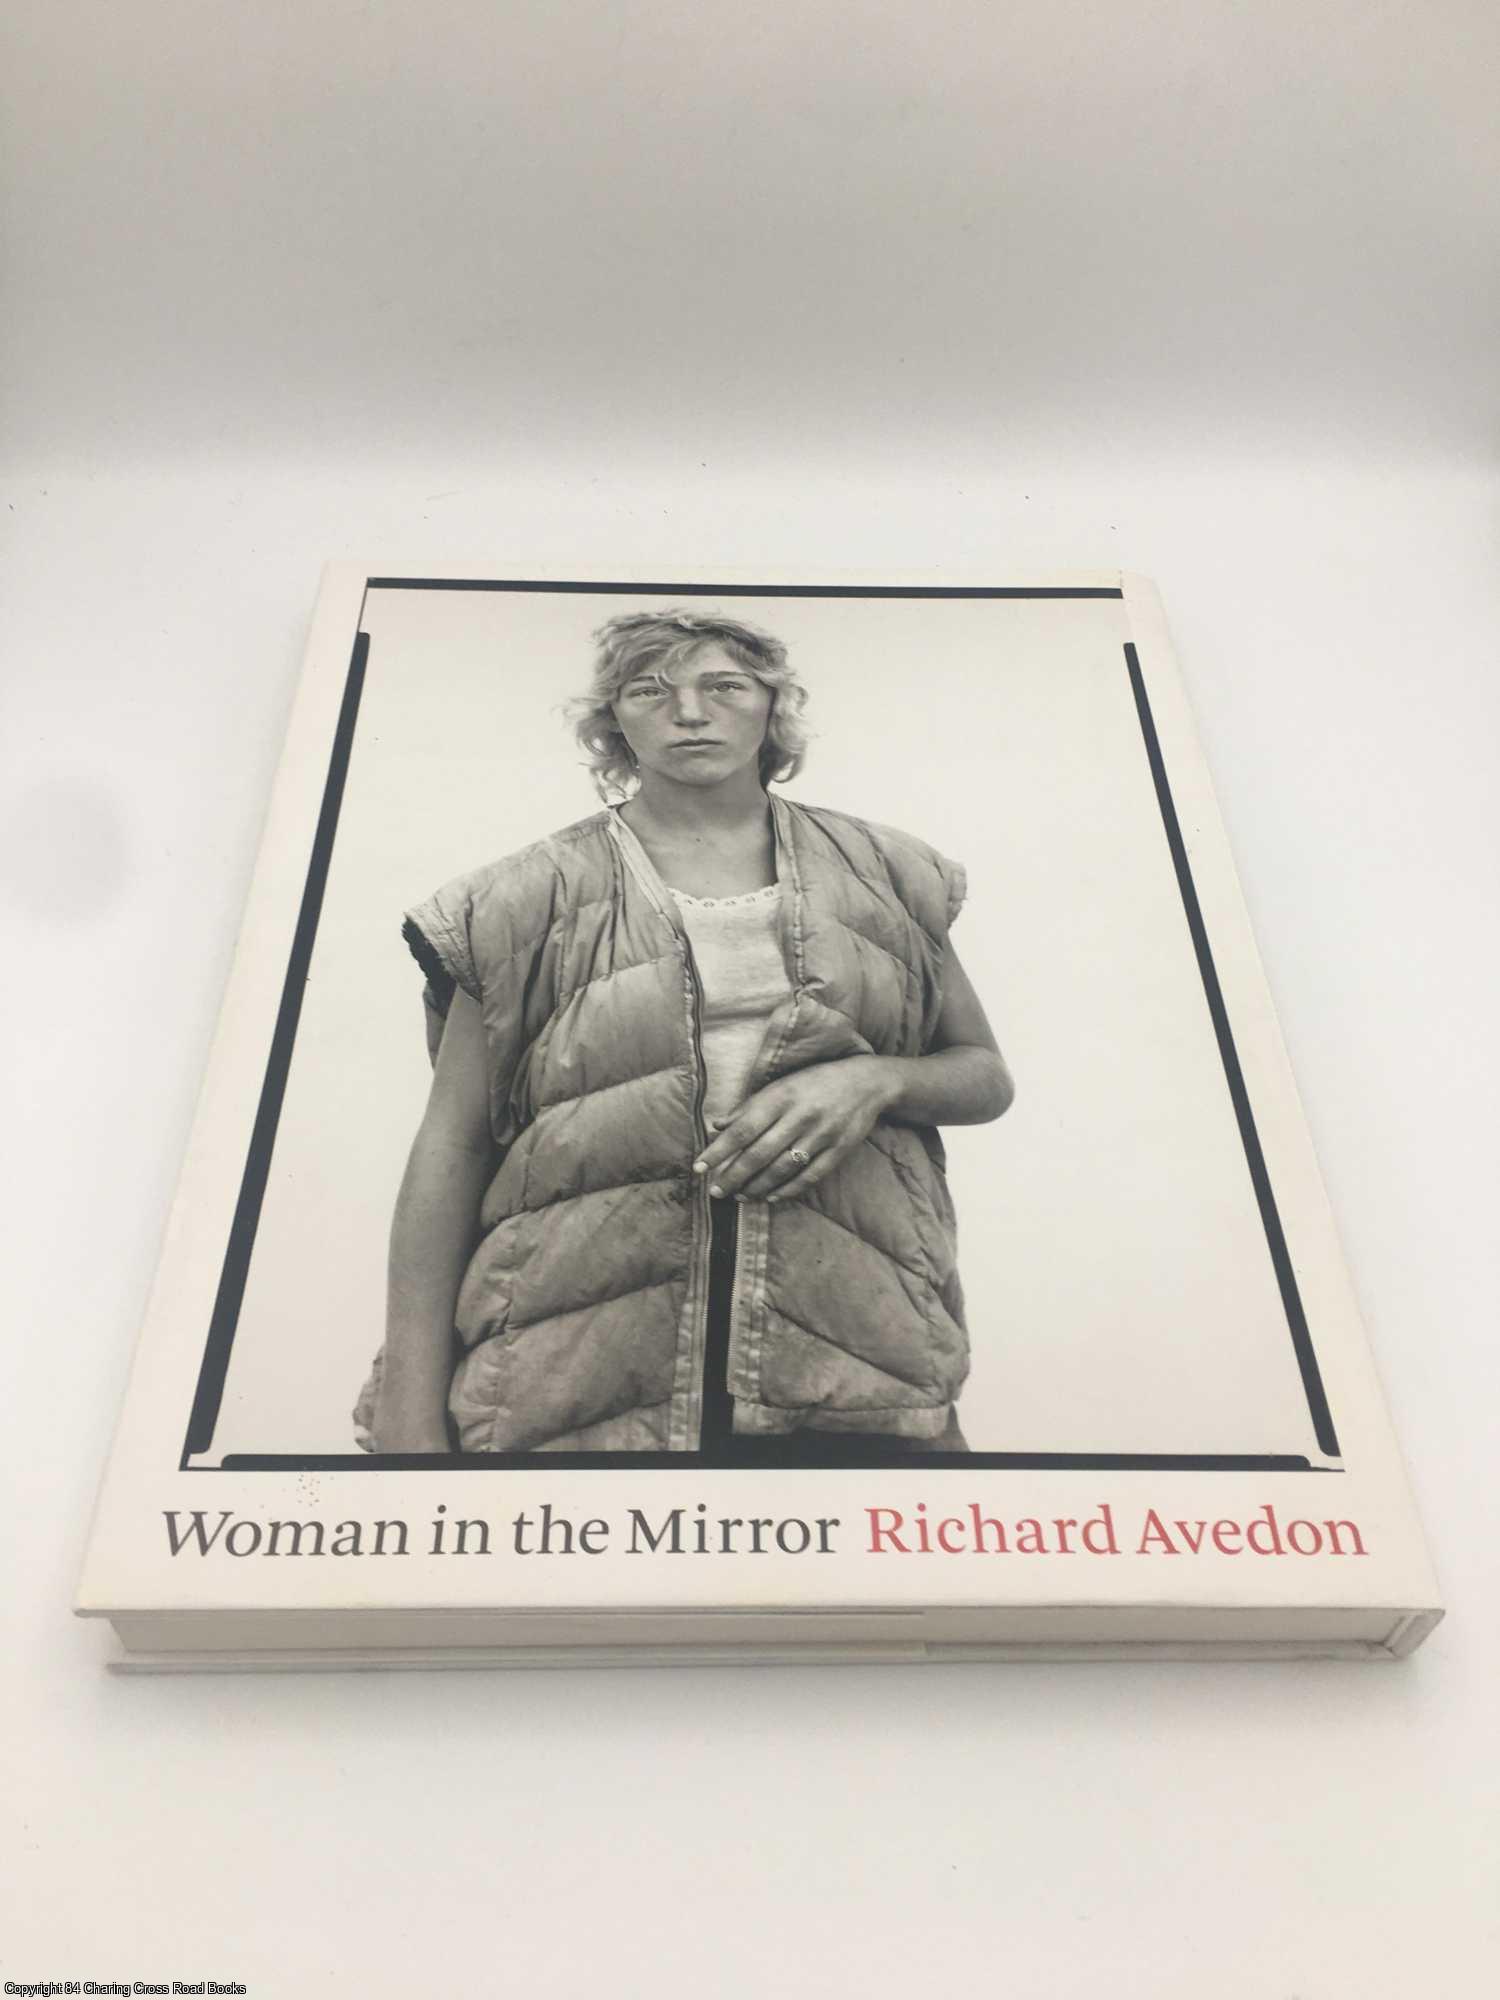 Woman in the Mirror by Richard Avedon on 84 Charing Cross Rare Books